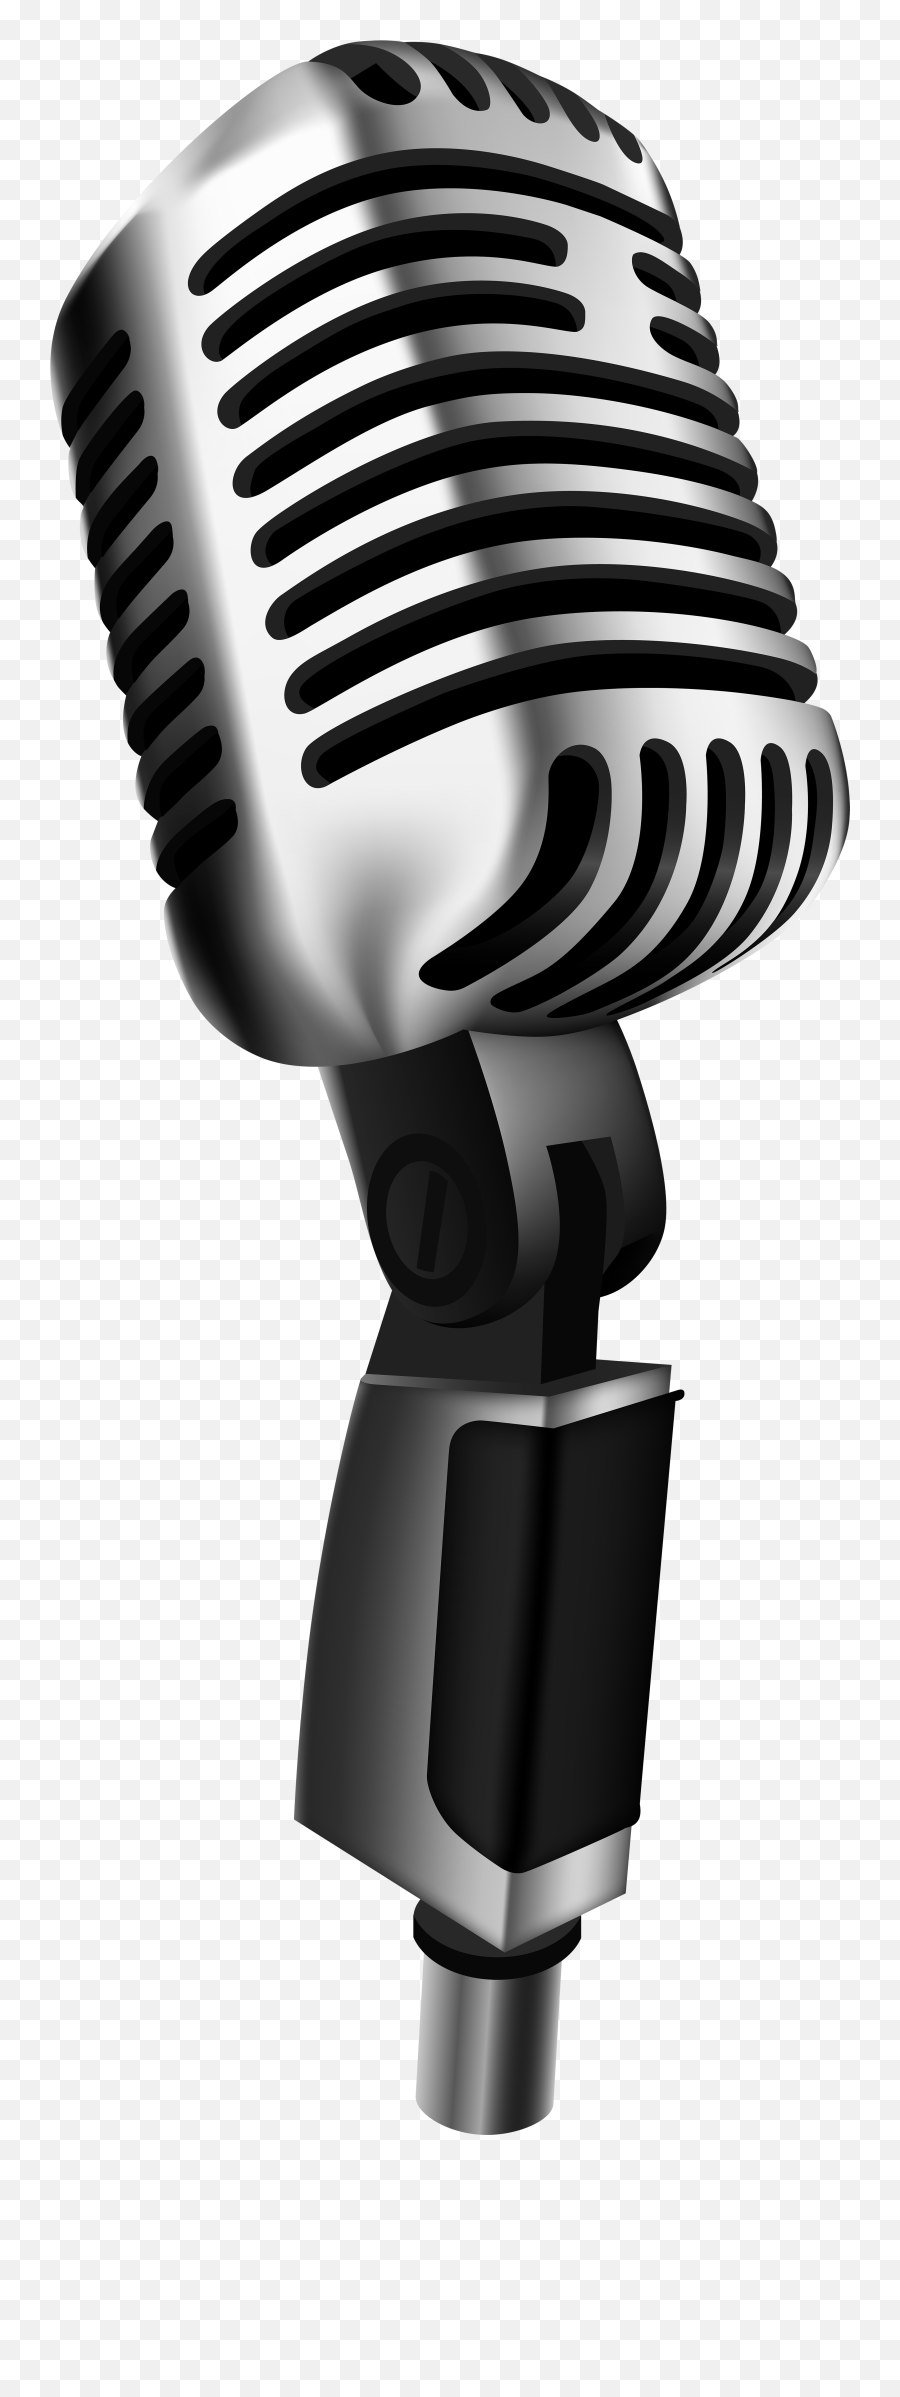 Microphone Png Image - Transparent Mic Looking Thursday Microphone Clipart Transparent Emoji,Microphone Png